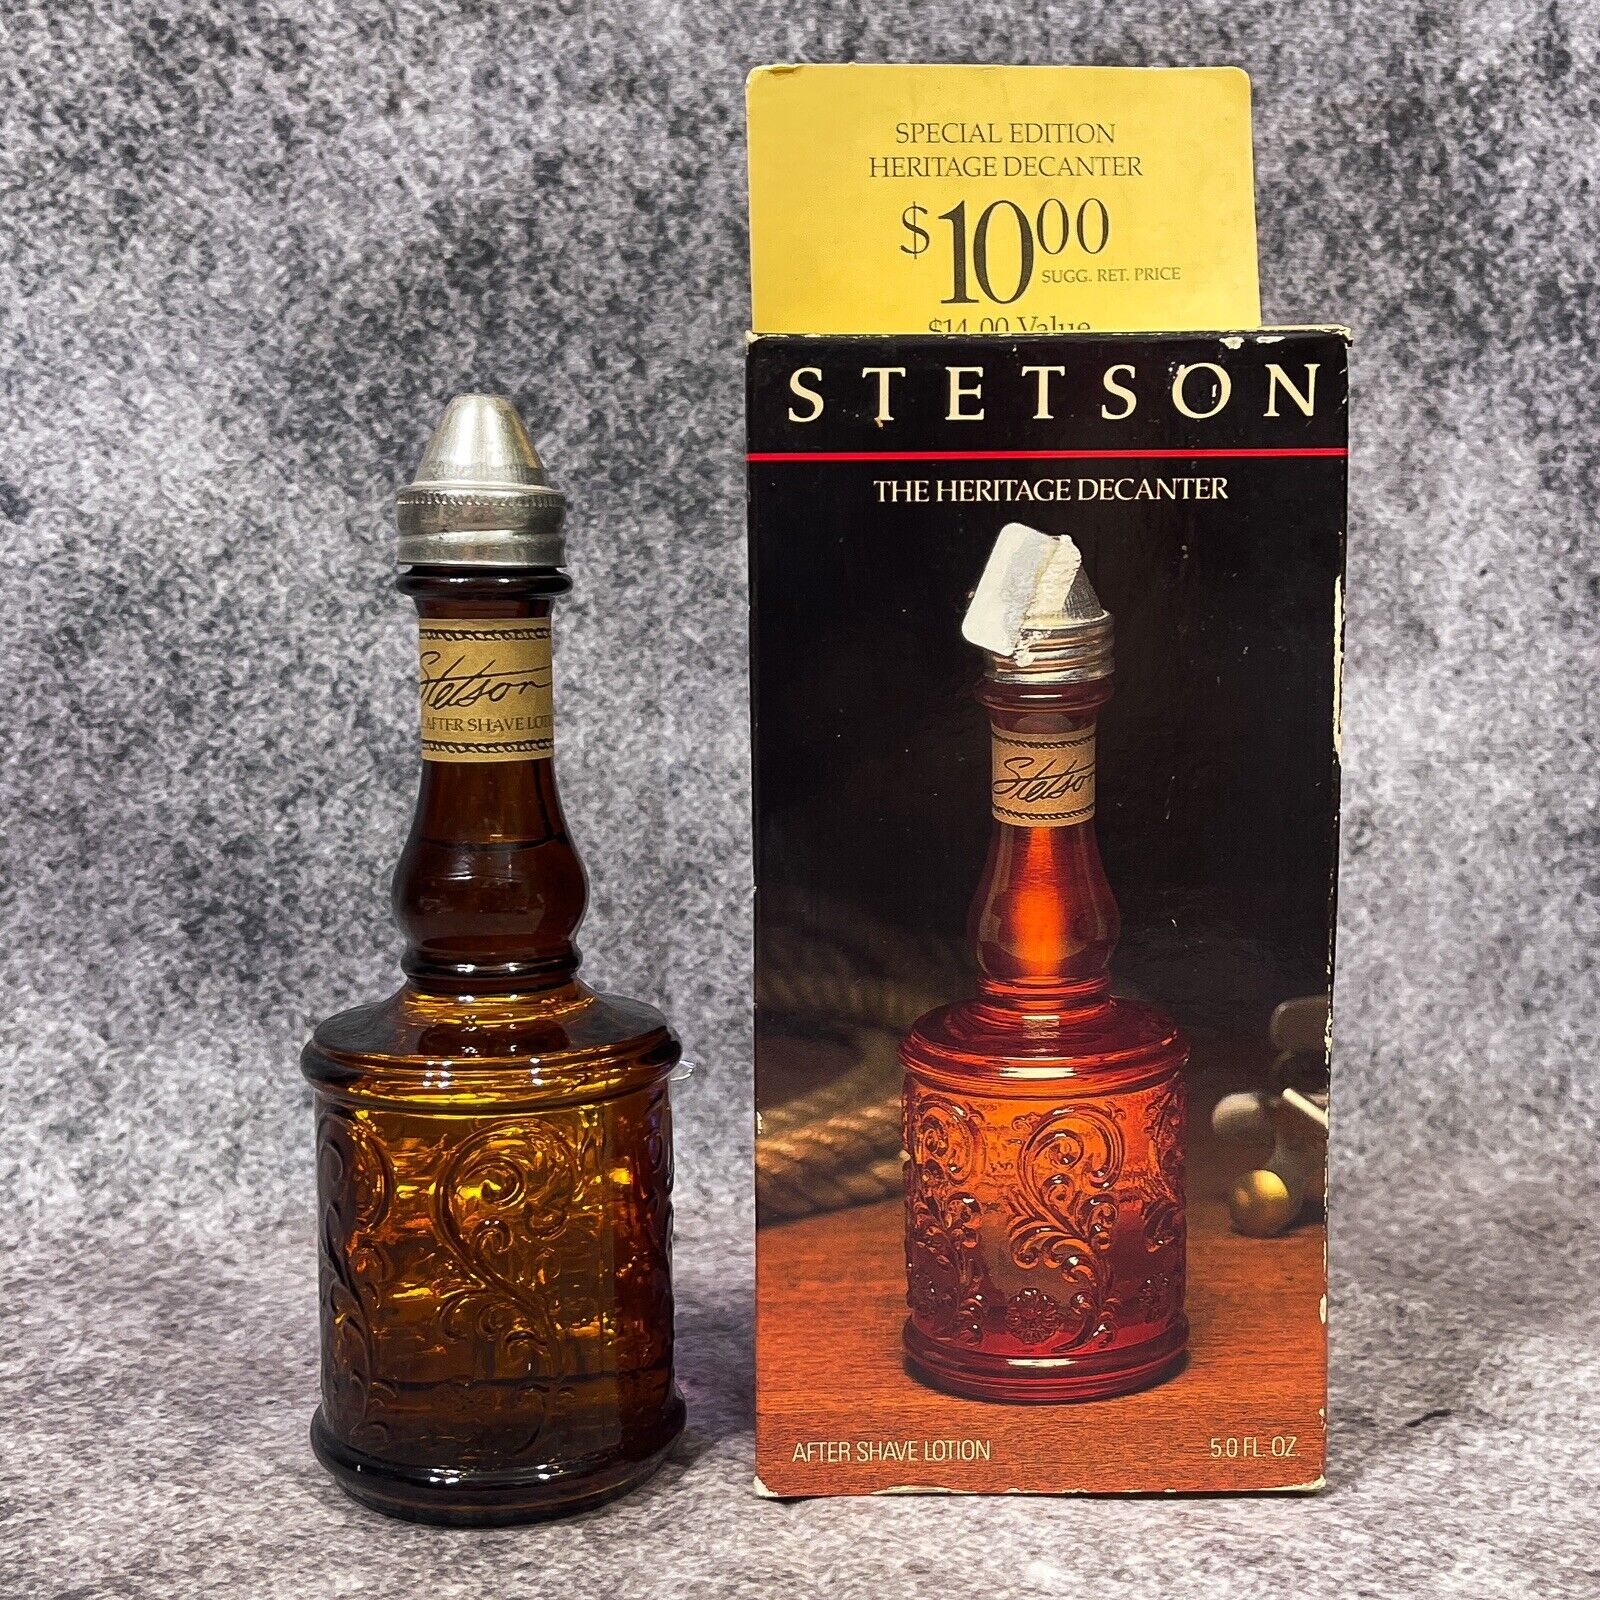 Stetson The Heritage Decanter After Shave Lotion 5 Fl. Oz. Vintage New W Box